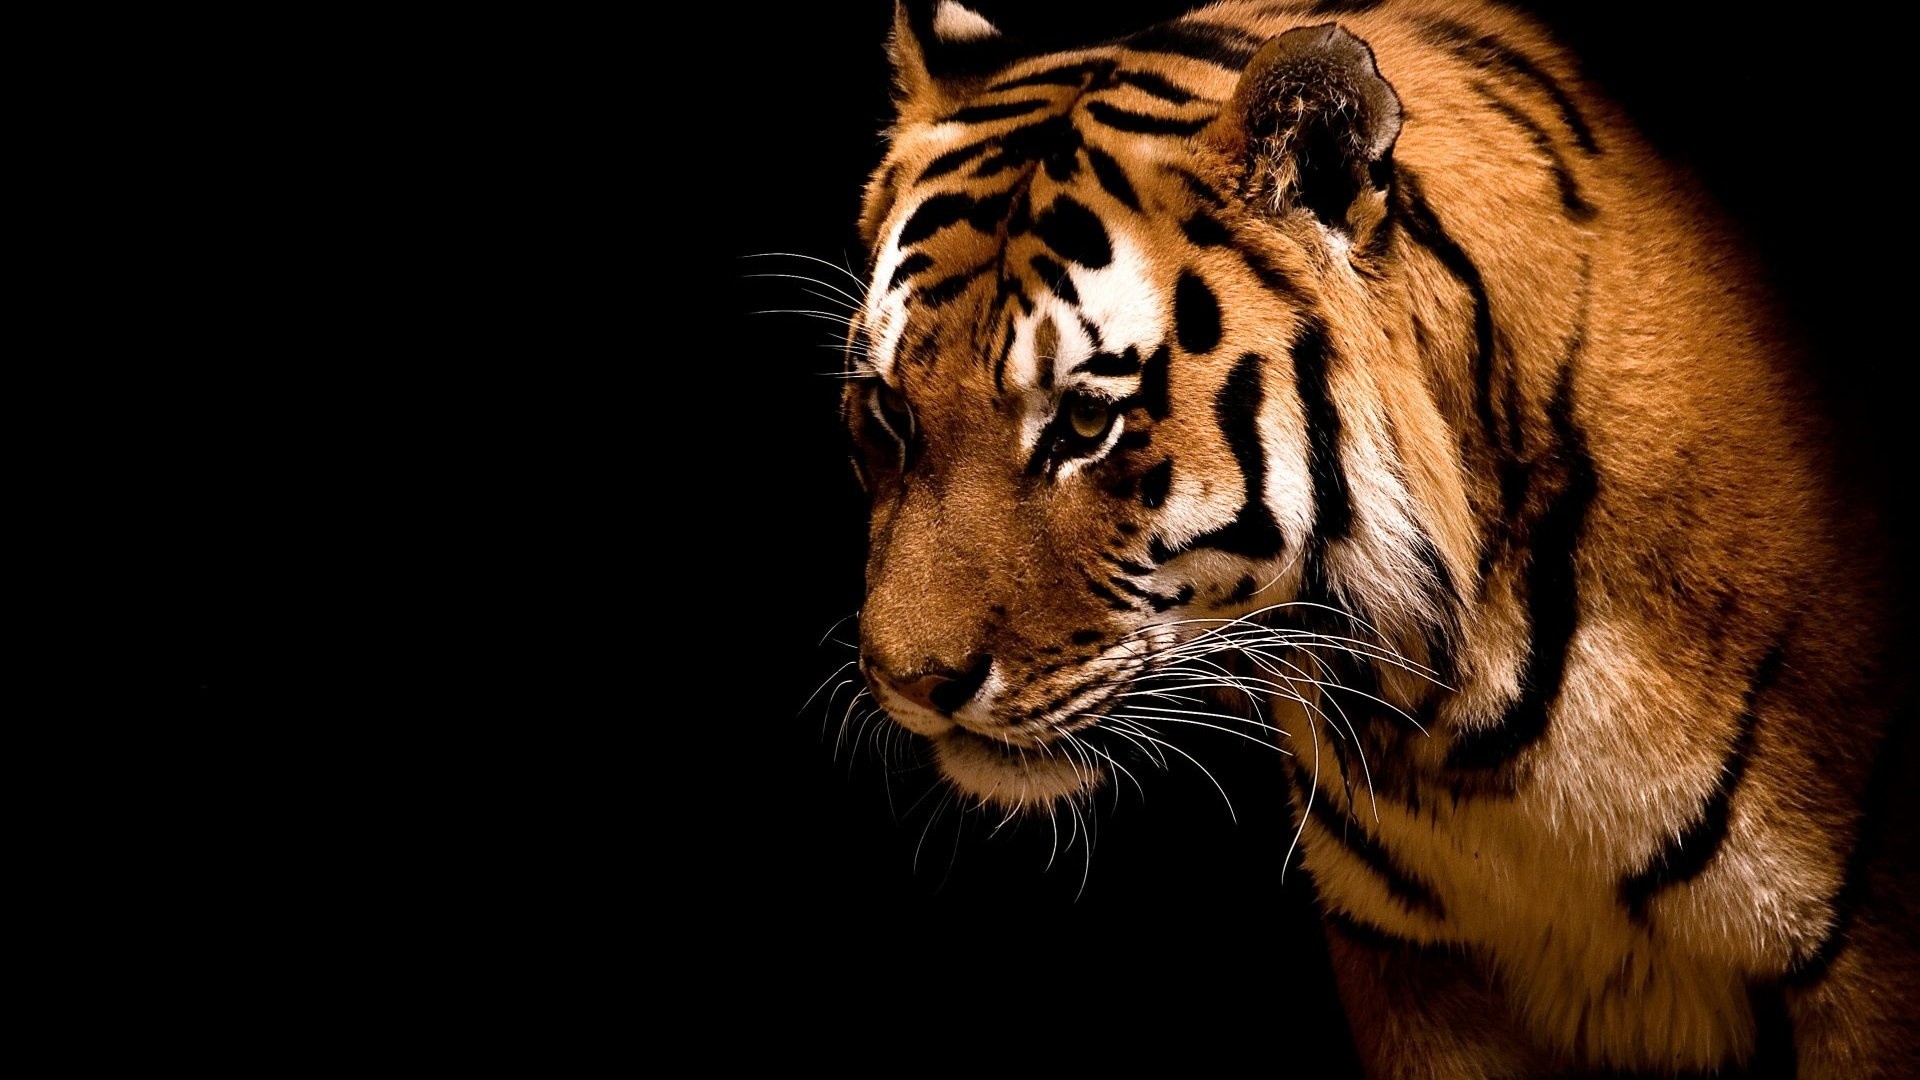 1920x1080 Tiger wallpaper wallpapers for free download about wallpapers. | HD  Wallpapers | Pinterest | Tiger wallpaper, Wallpaper and Wallpapers android